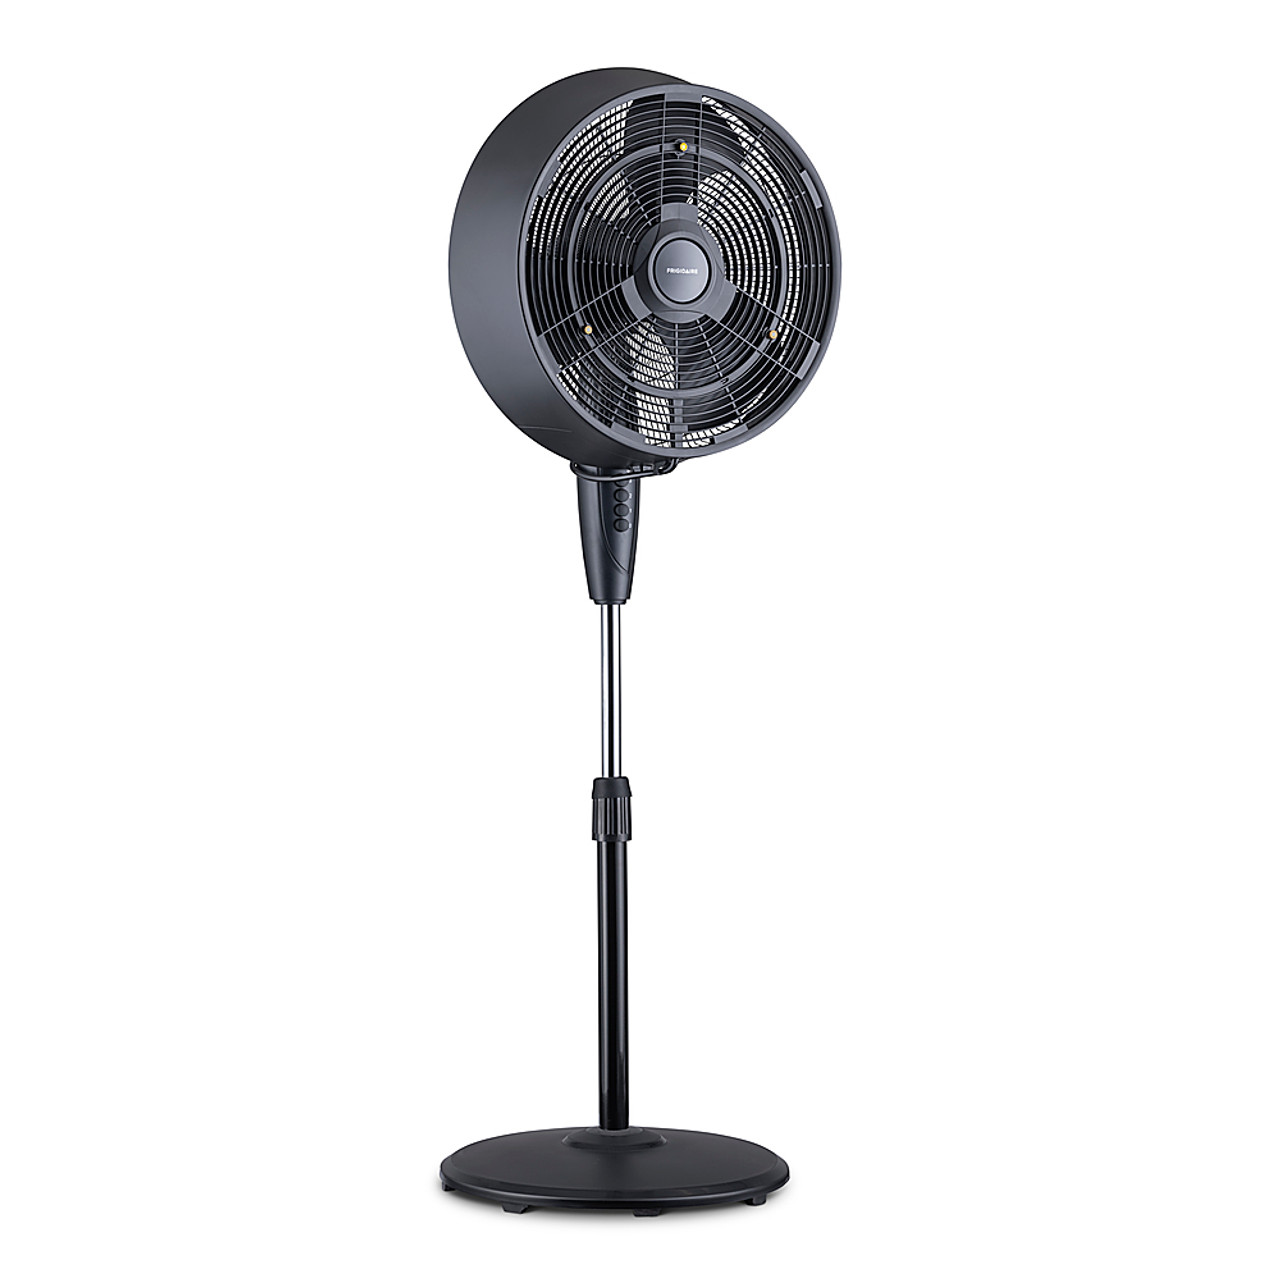 NewAir - Frigidaire Outdoor Misting Fan and Pedestal Fan in Black, Cools 500 sq. ft. with 3 Fan Speeds and Wide-Angle Oscillation - Black